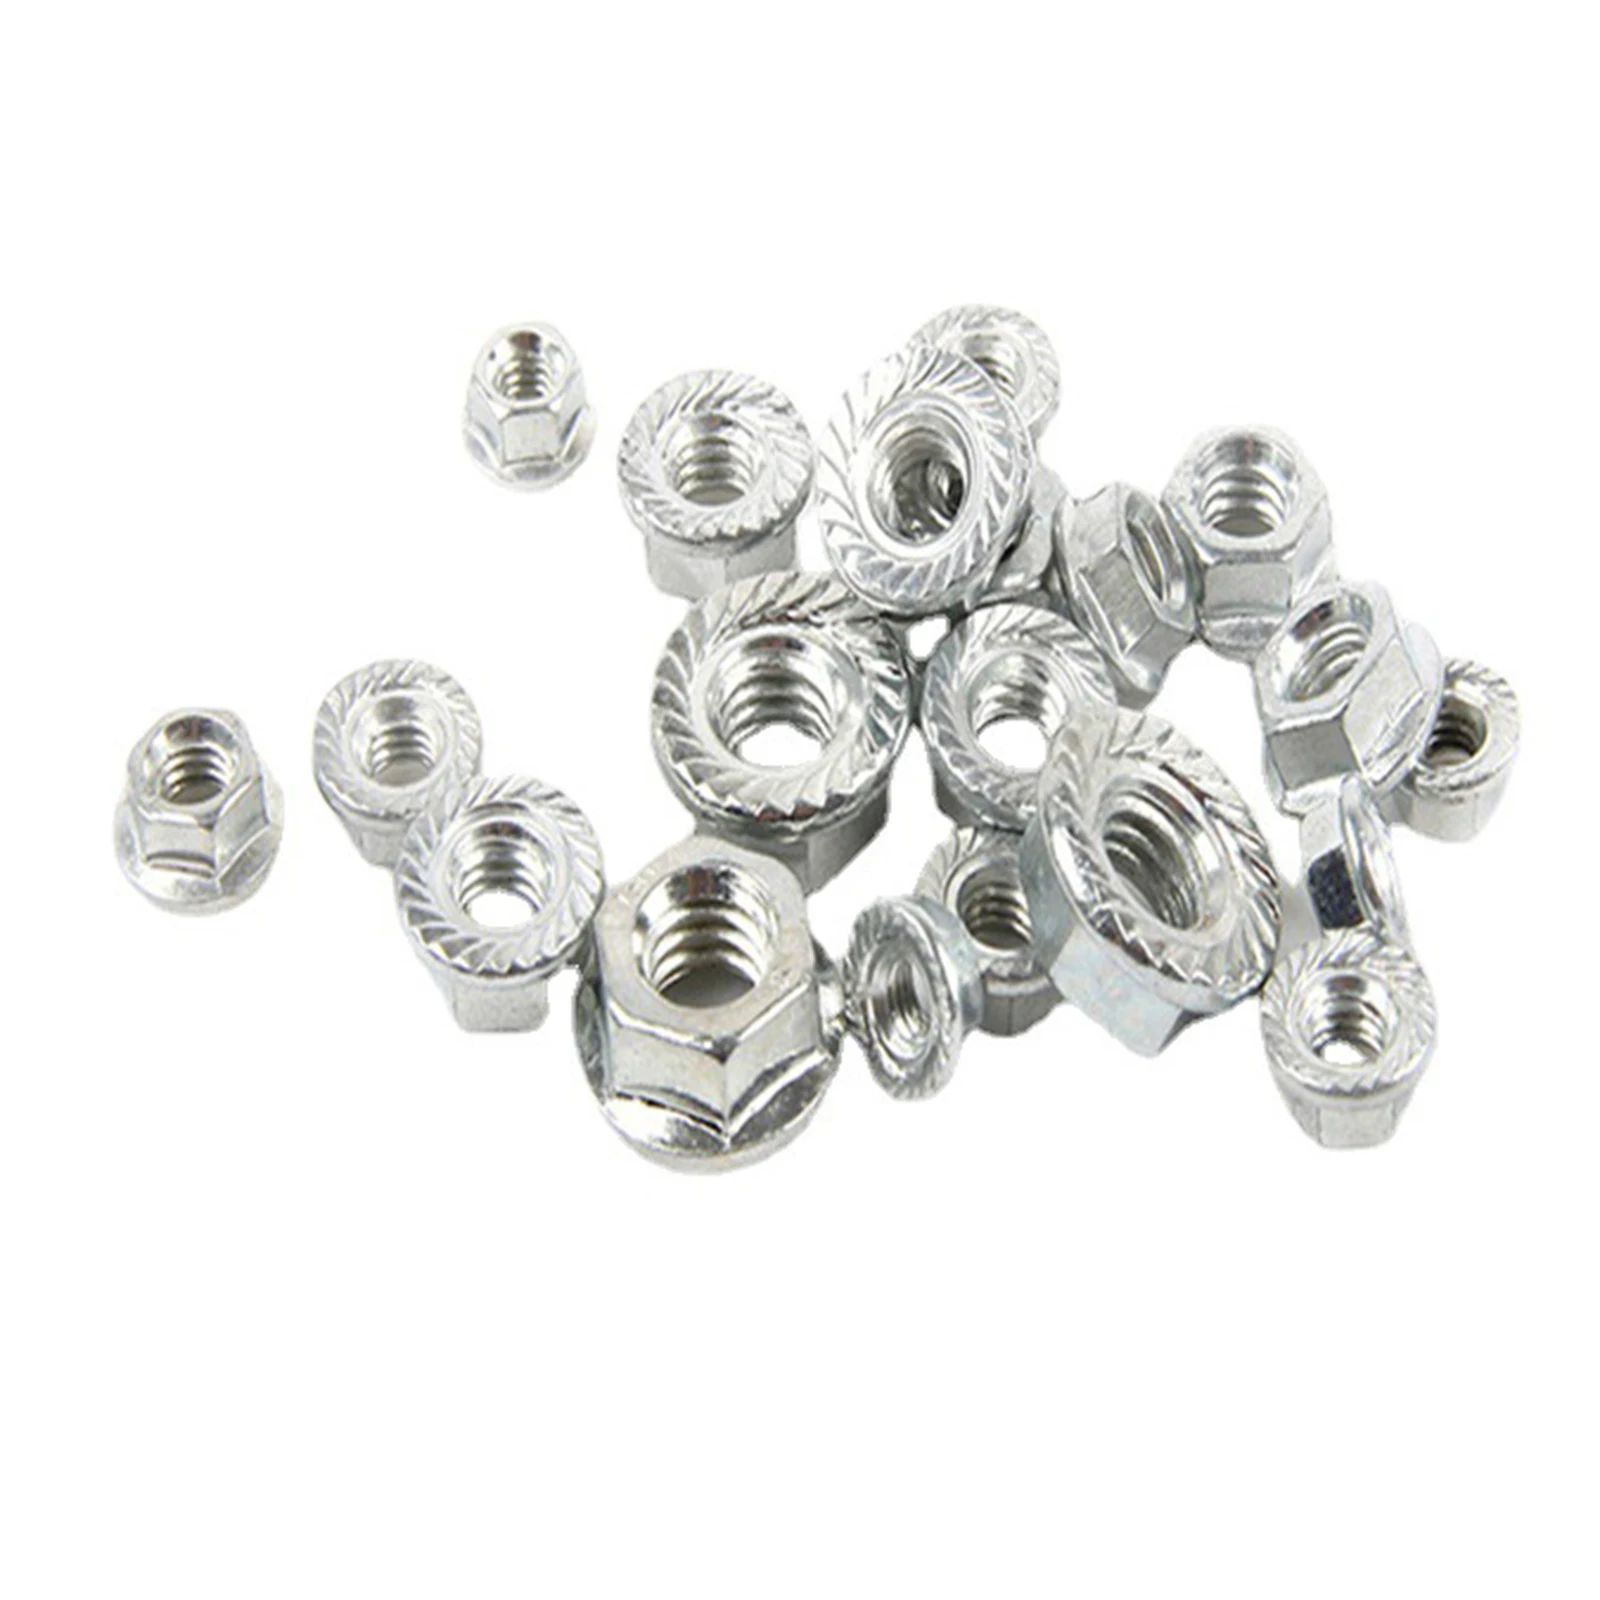 

Bicycle Hub Motor Nuts 1 Set Accessories M8/ M9.5/M10 Parts Siver Steel Outdoor For Scooter For 250W-1000W Motors